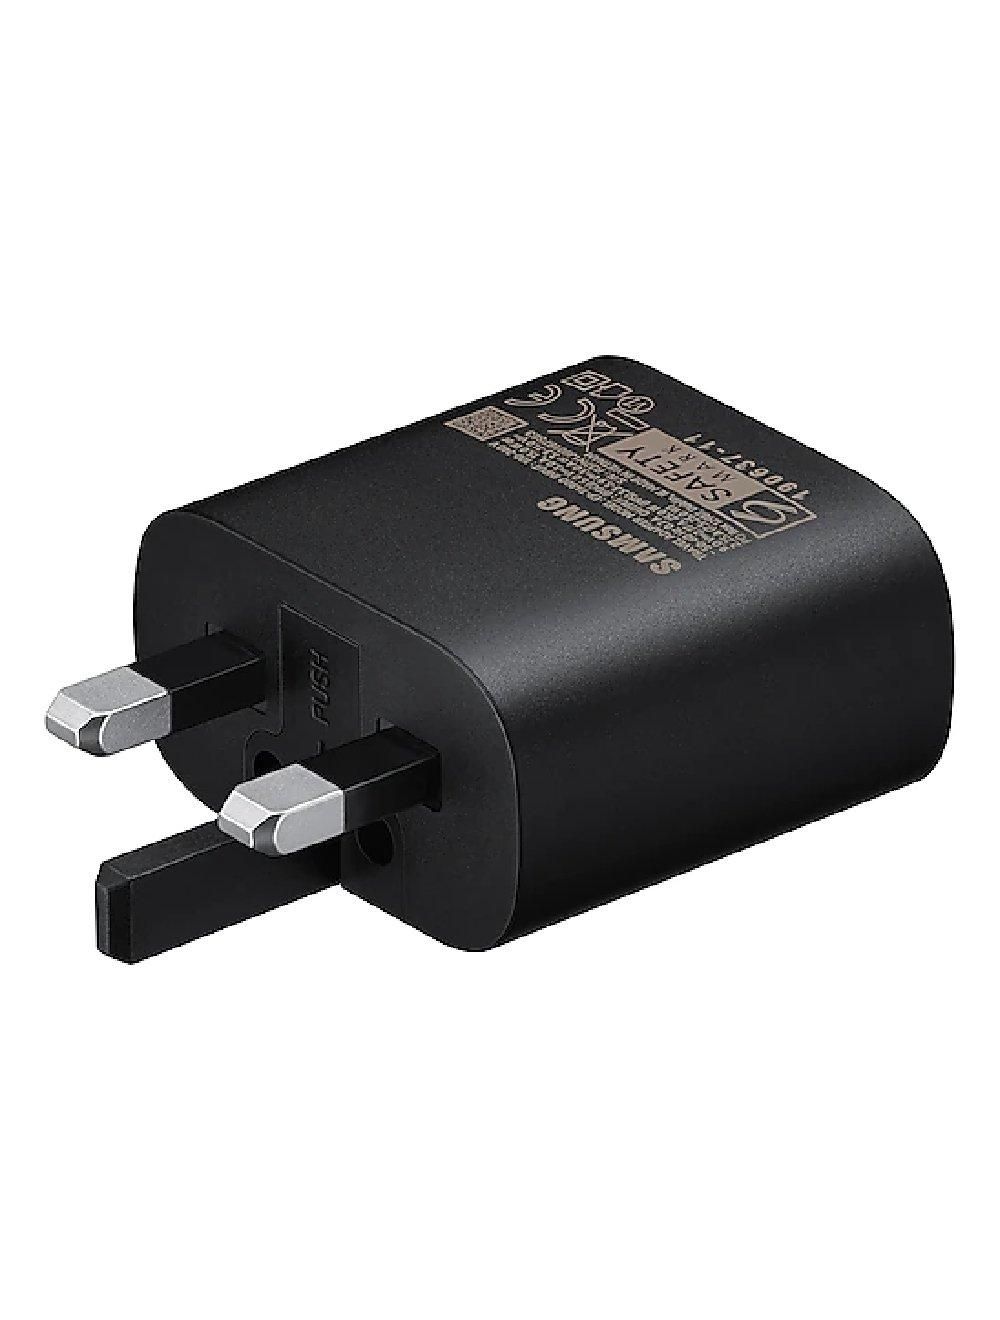 Samsung Travel Adapter With Cable - 25W / USB Type-C / 1 Meter / Black